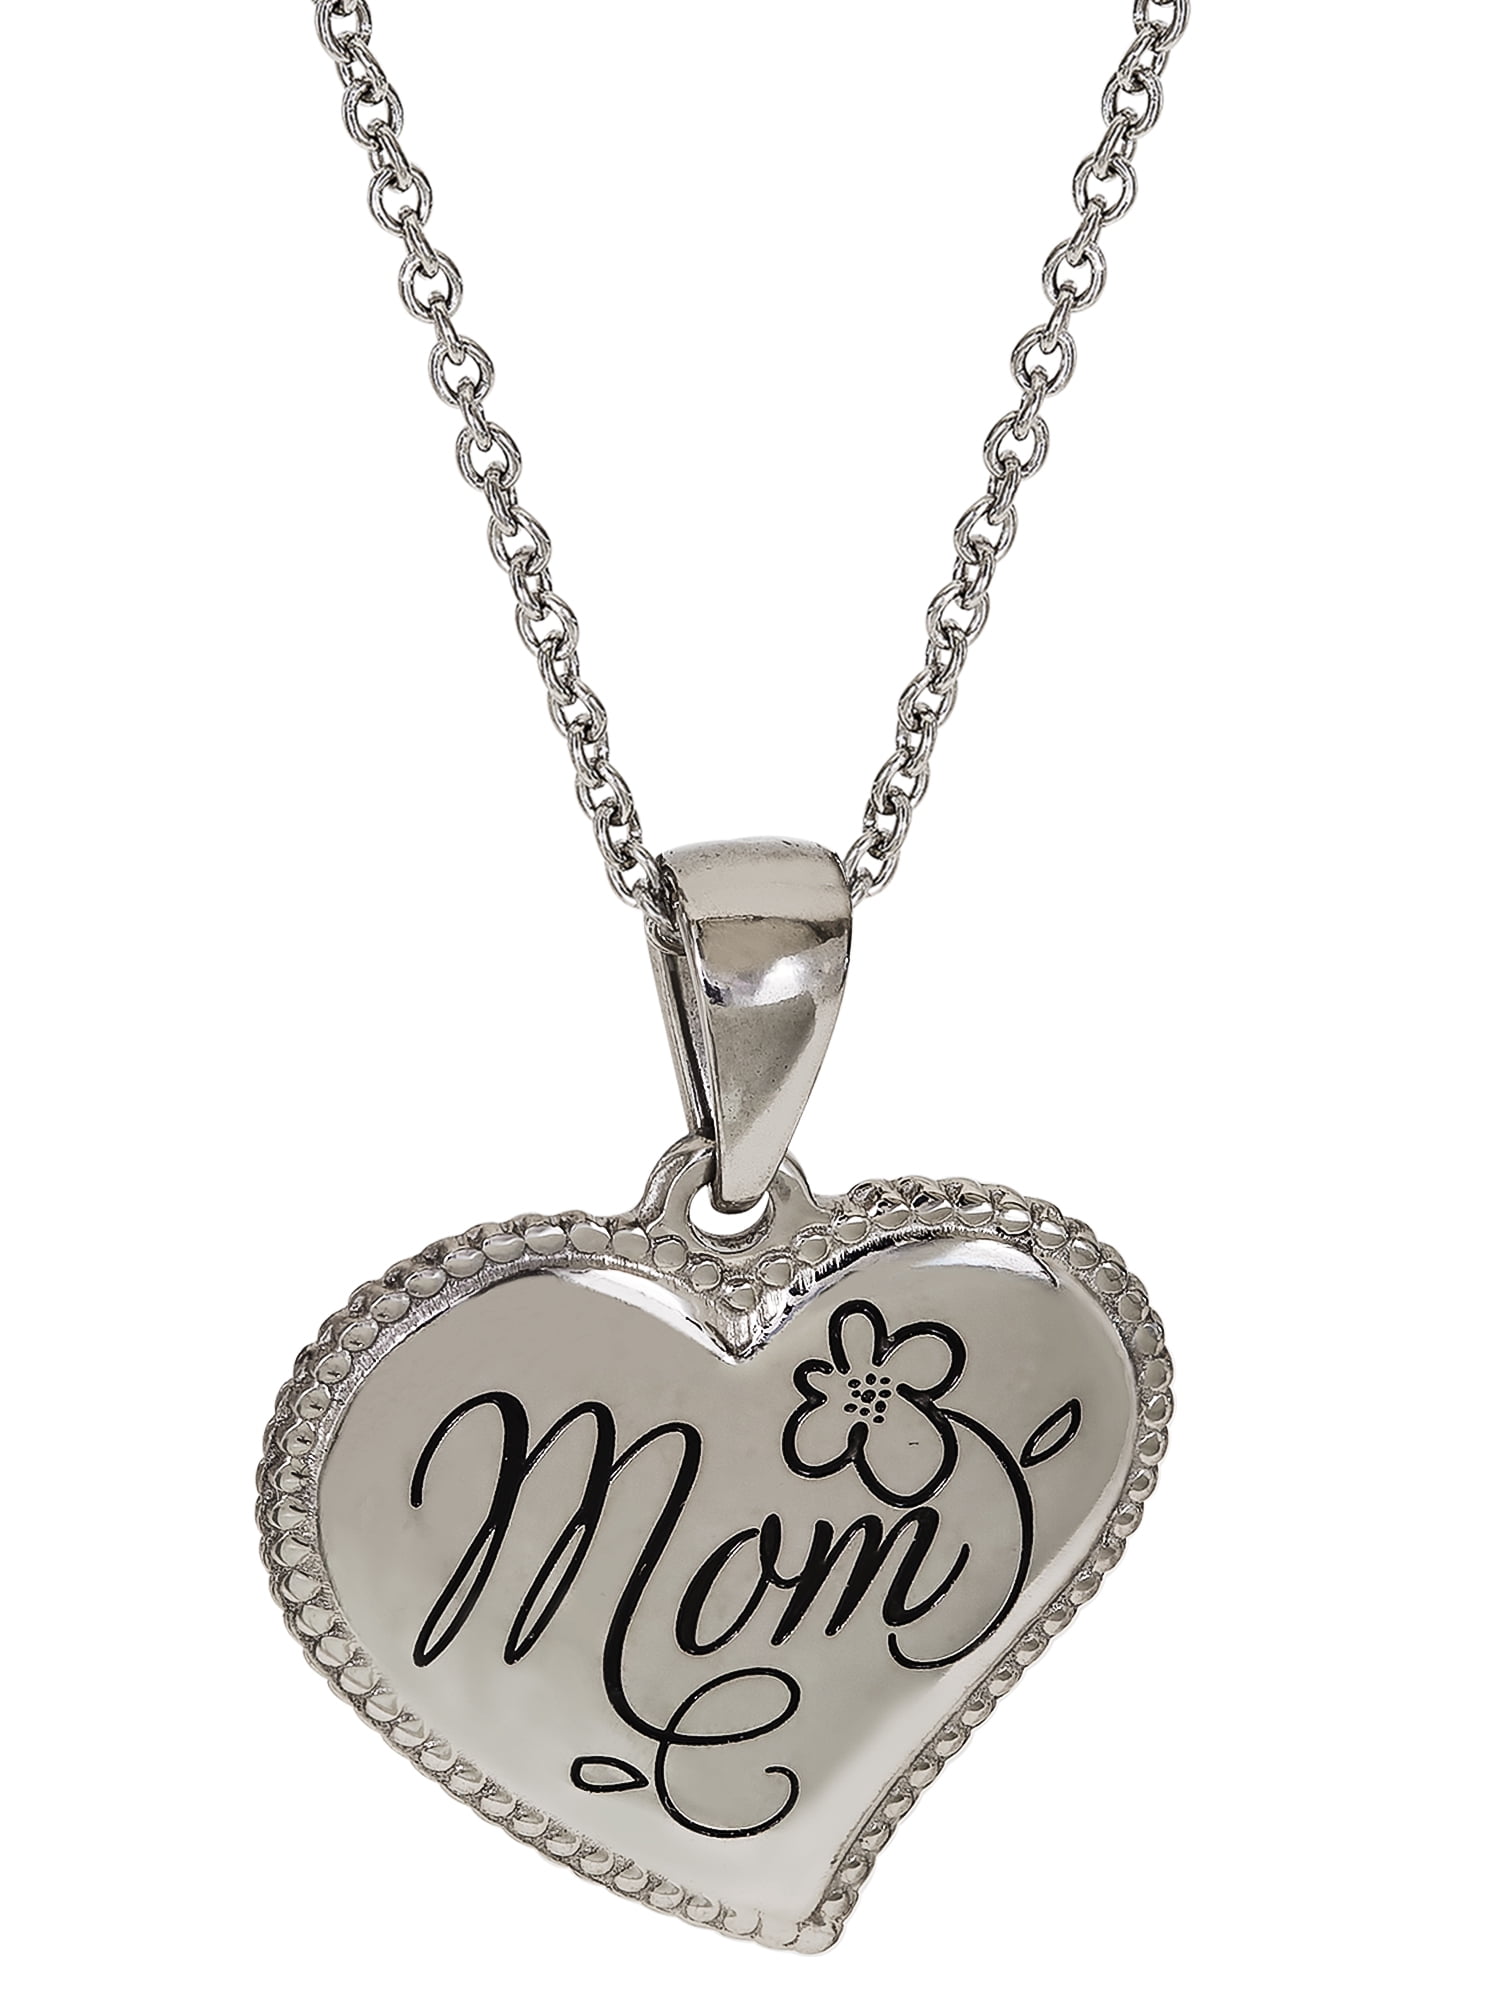 Gold Heart MUM Necklace Mother Gifts For Her Mother Mom Women CHRISTMAS DEALS